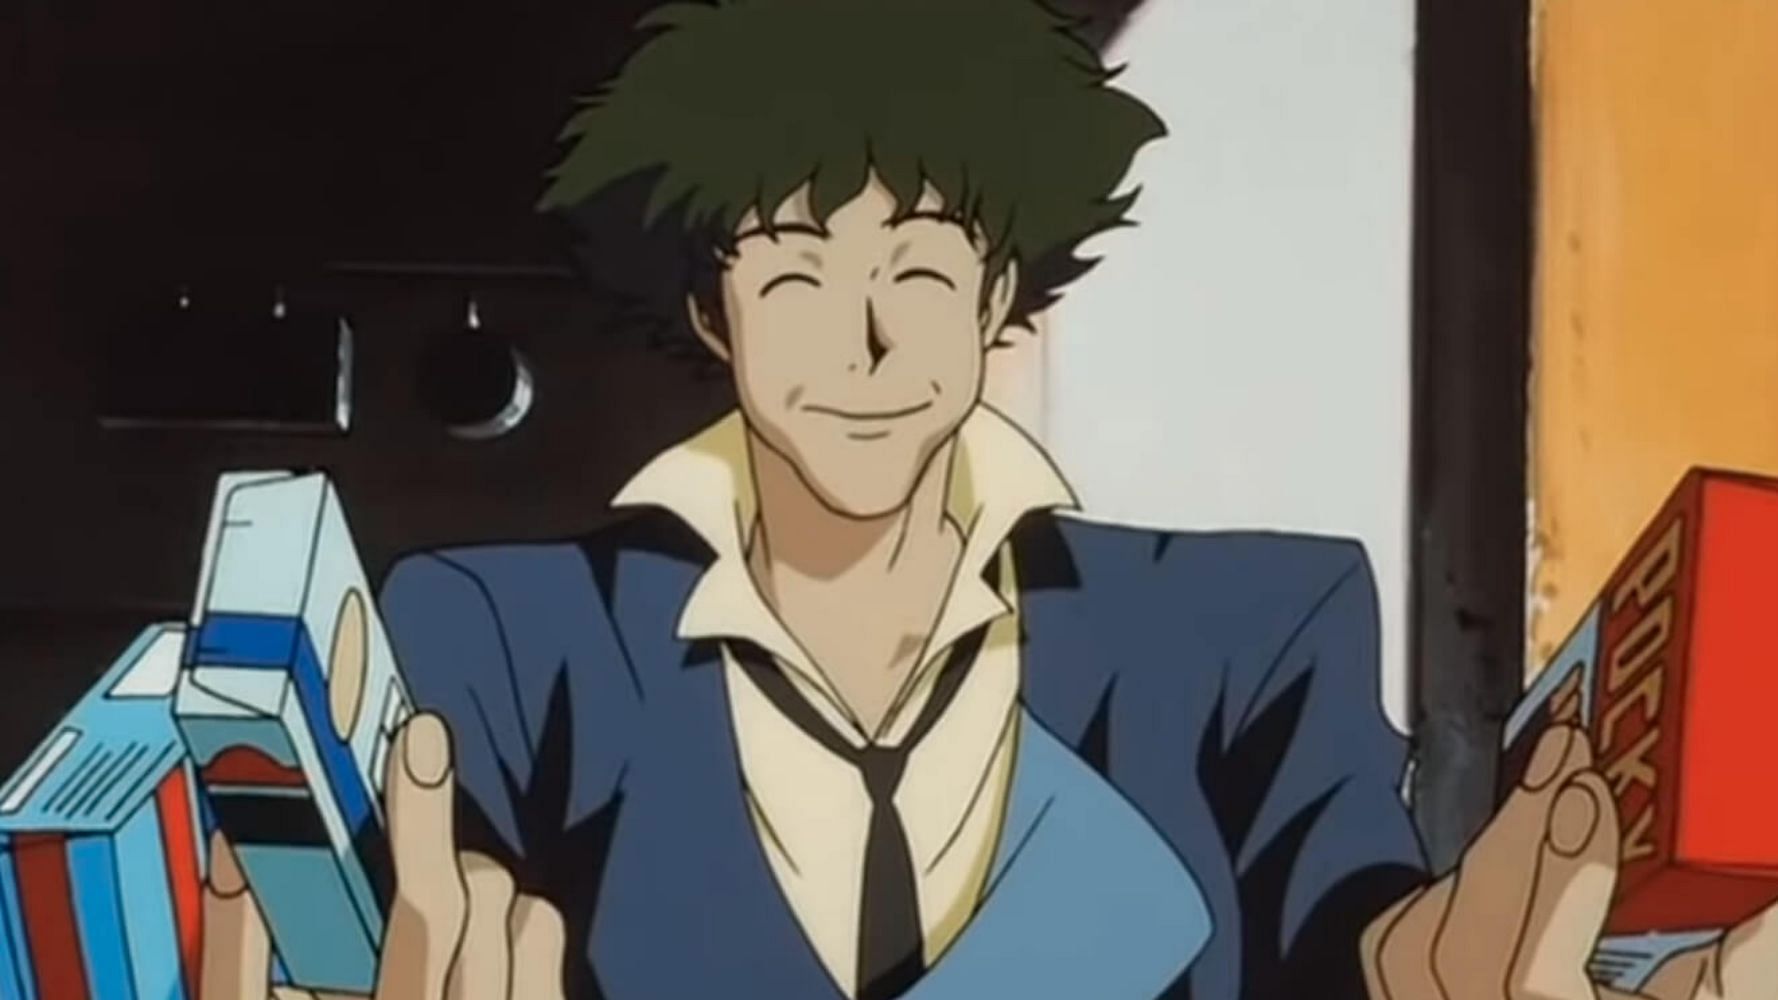 The one and only Spike Spiegel (Image via Sunrise)